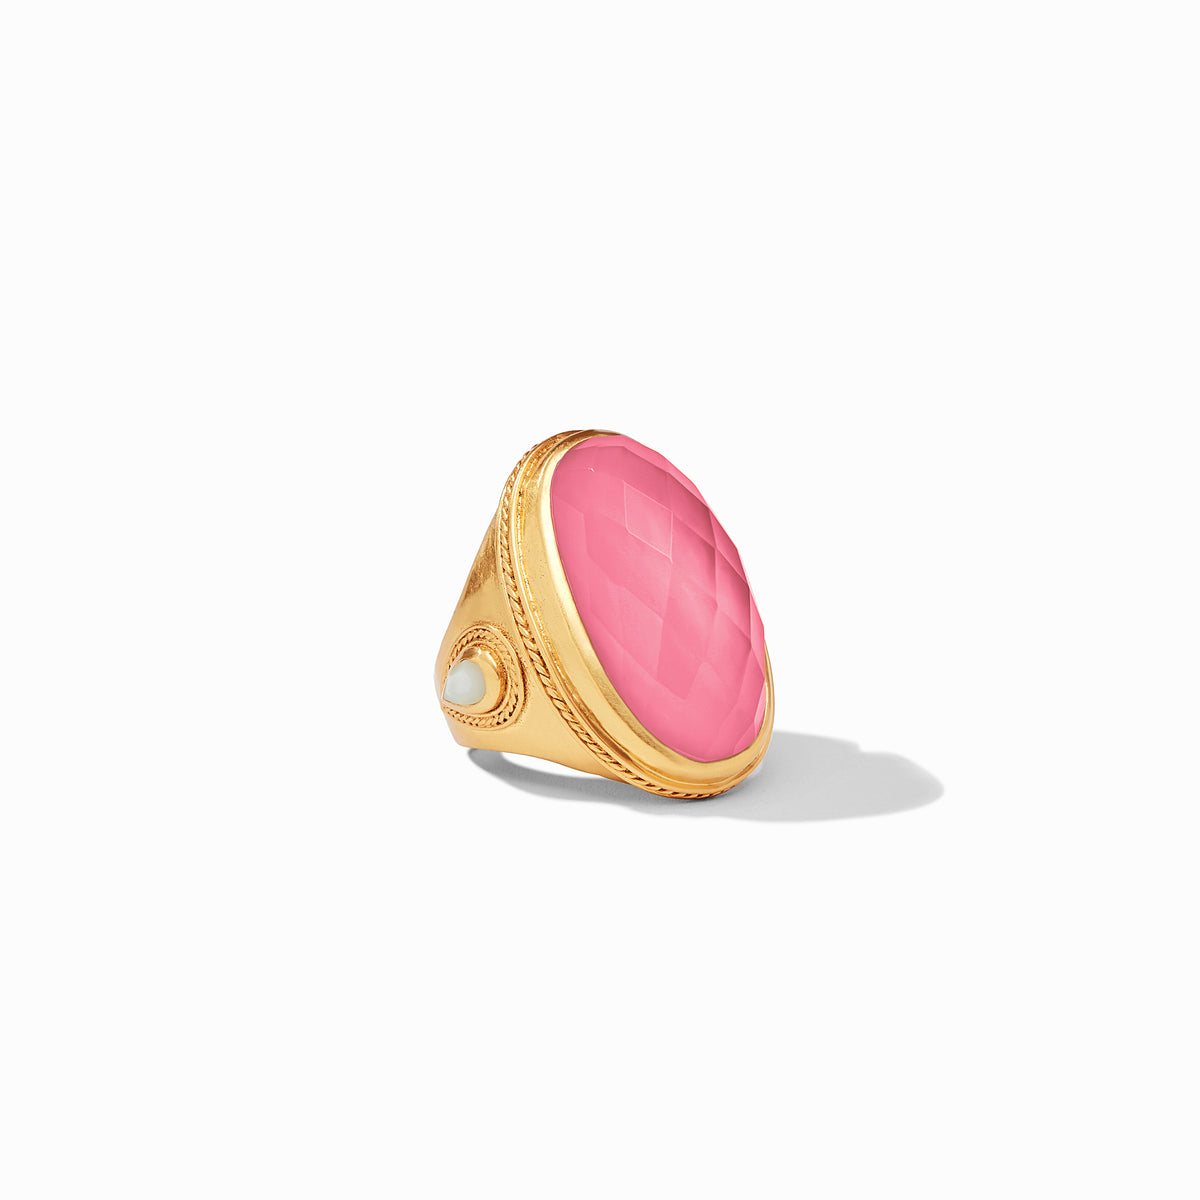 Julie Vos - Cannes Statement Ring, Iridescent Peony Pink / 8